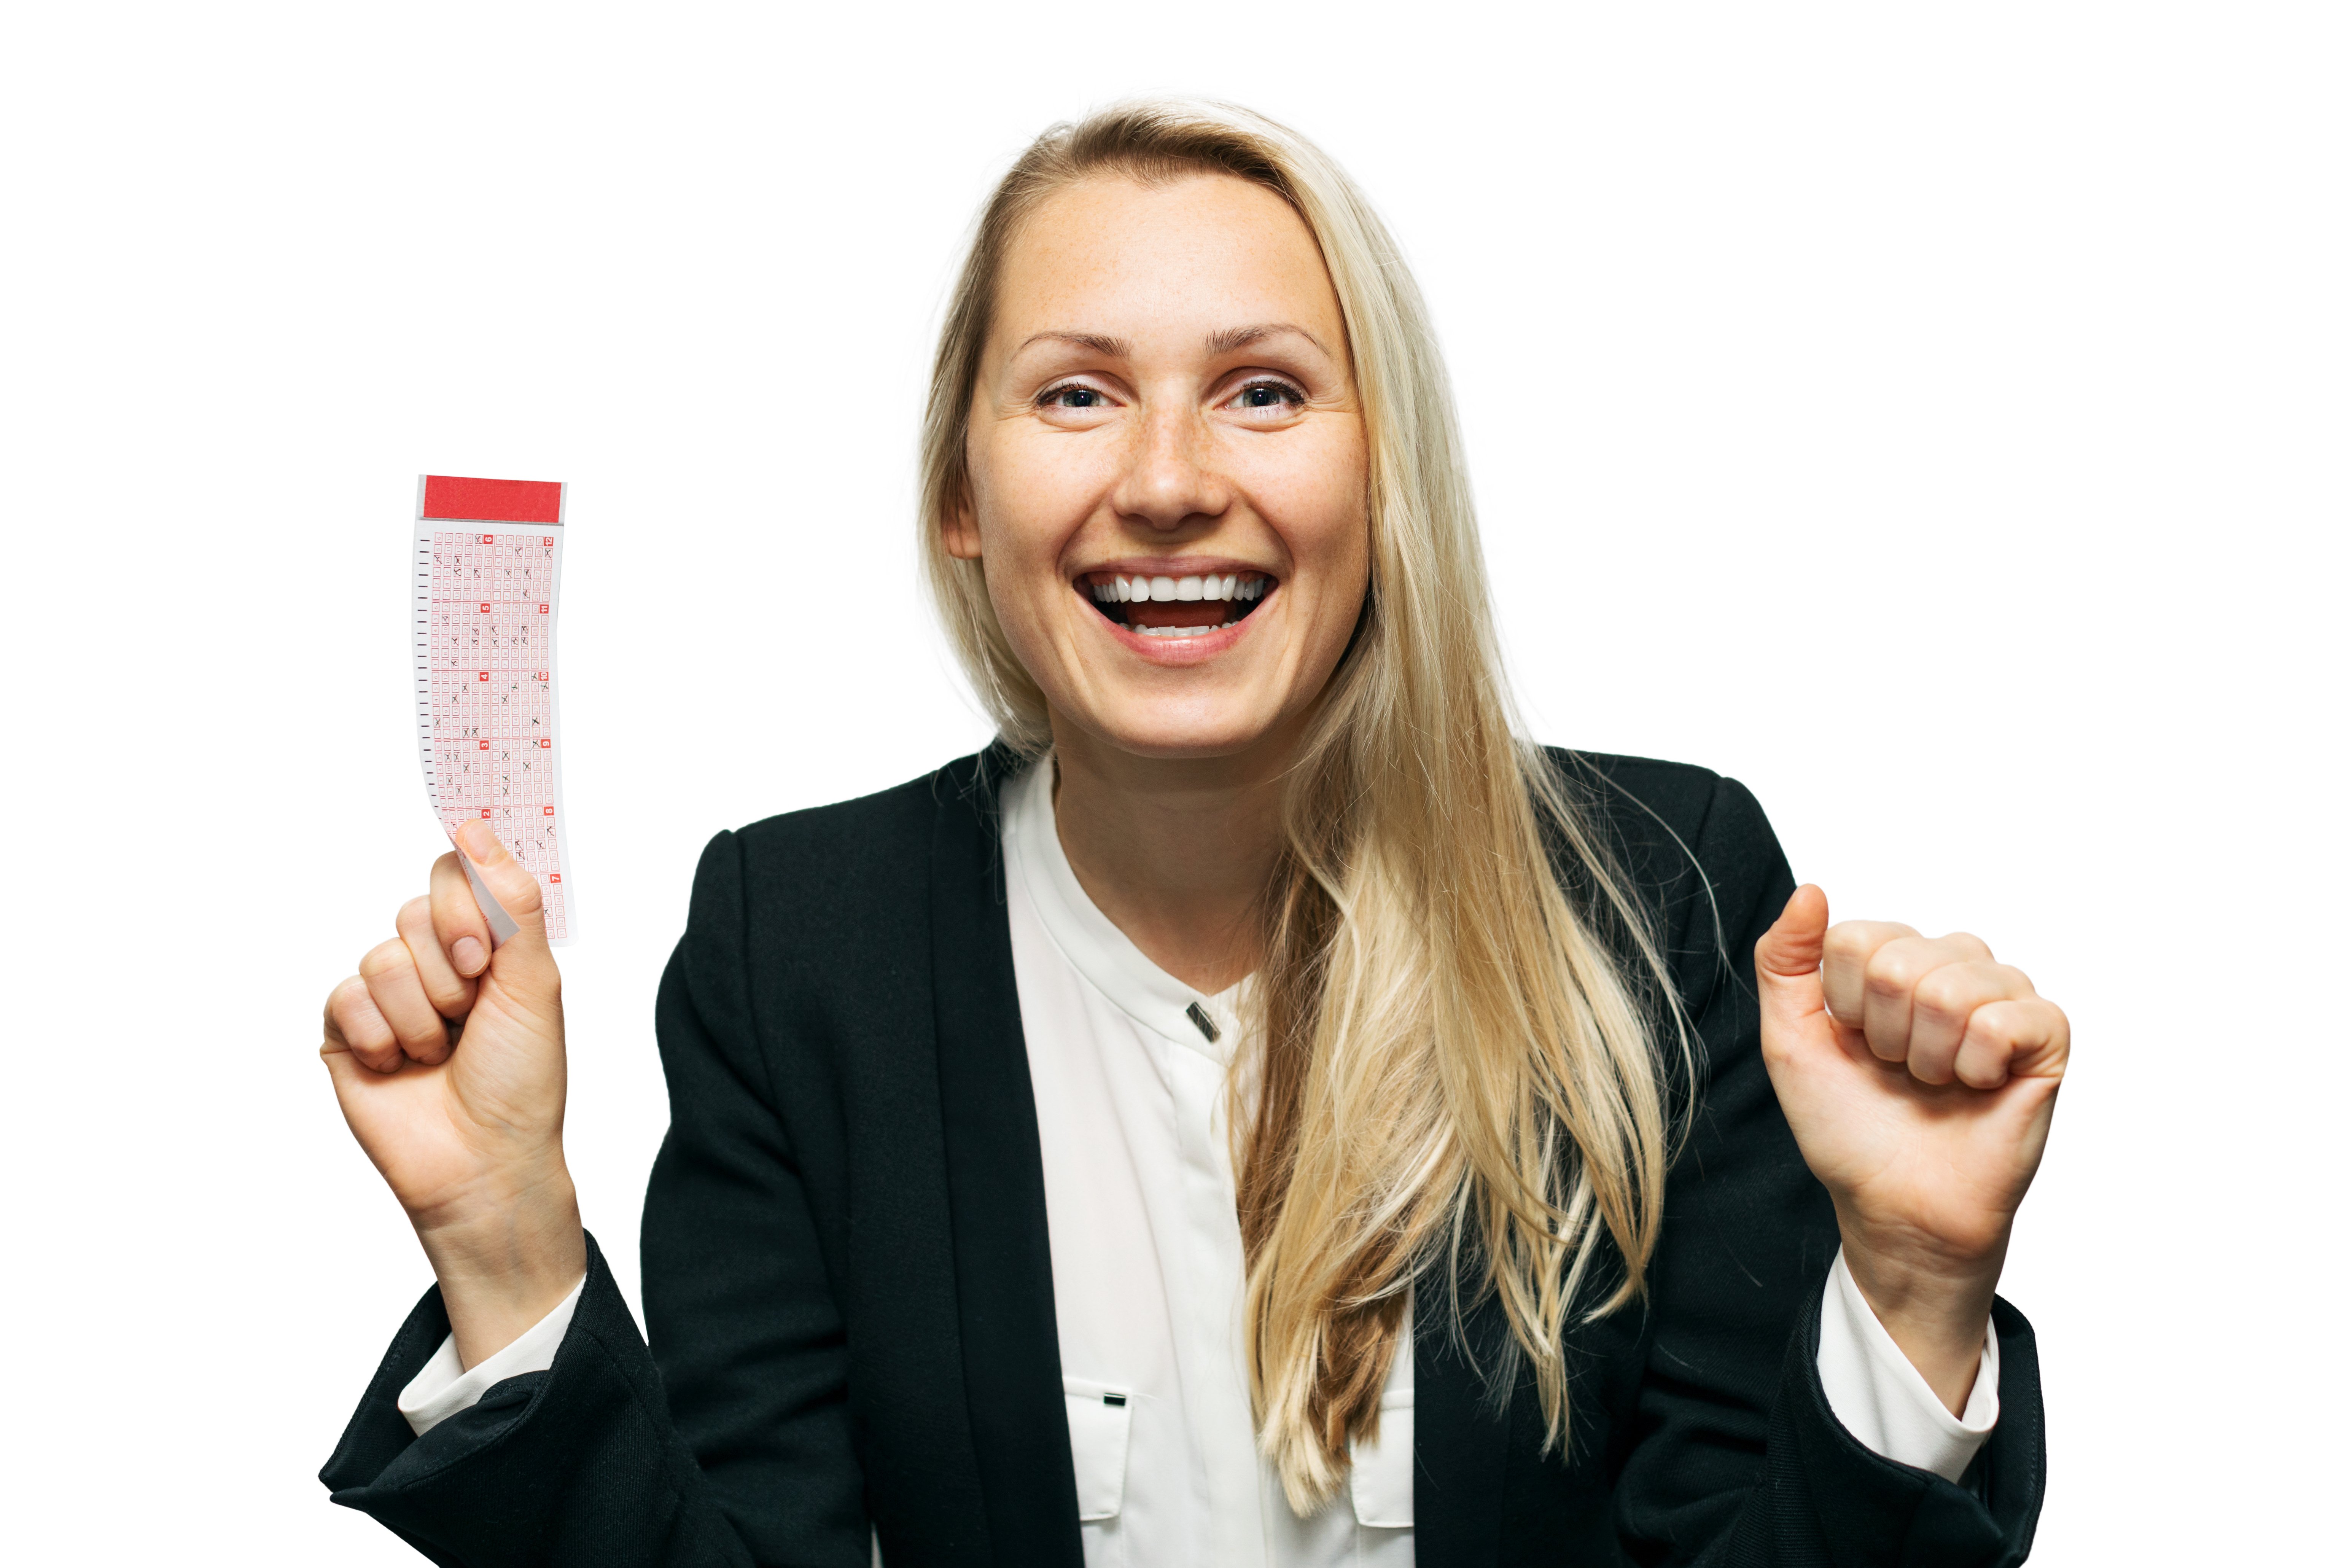 An ecstatic woman with a smile on her face holding a lottery ticket. | Photo: Shutterstock.